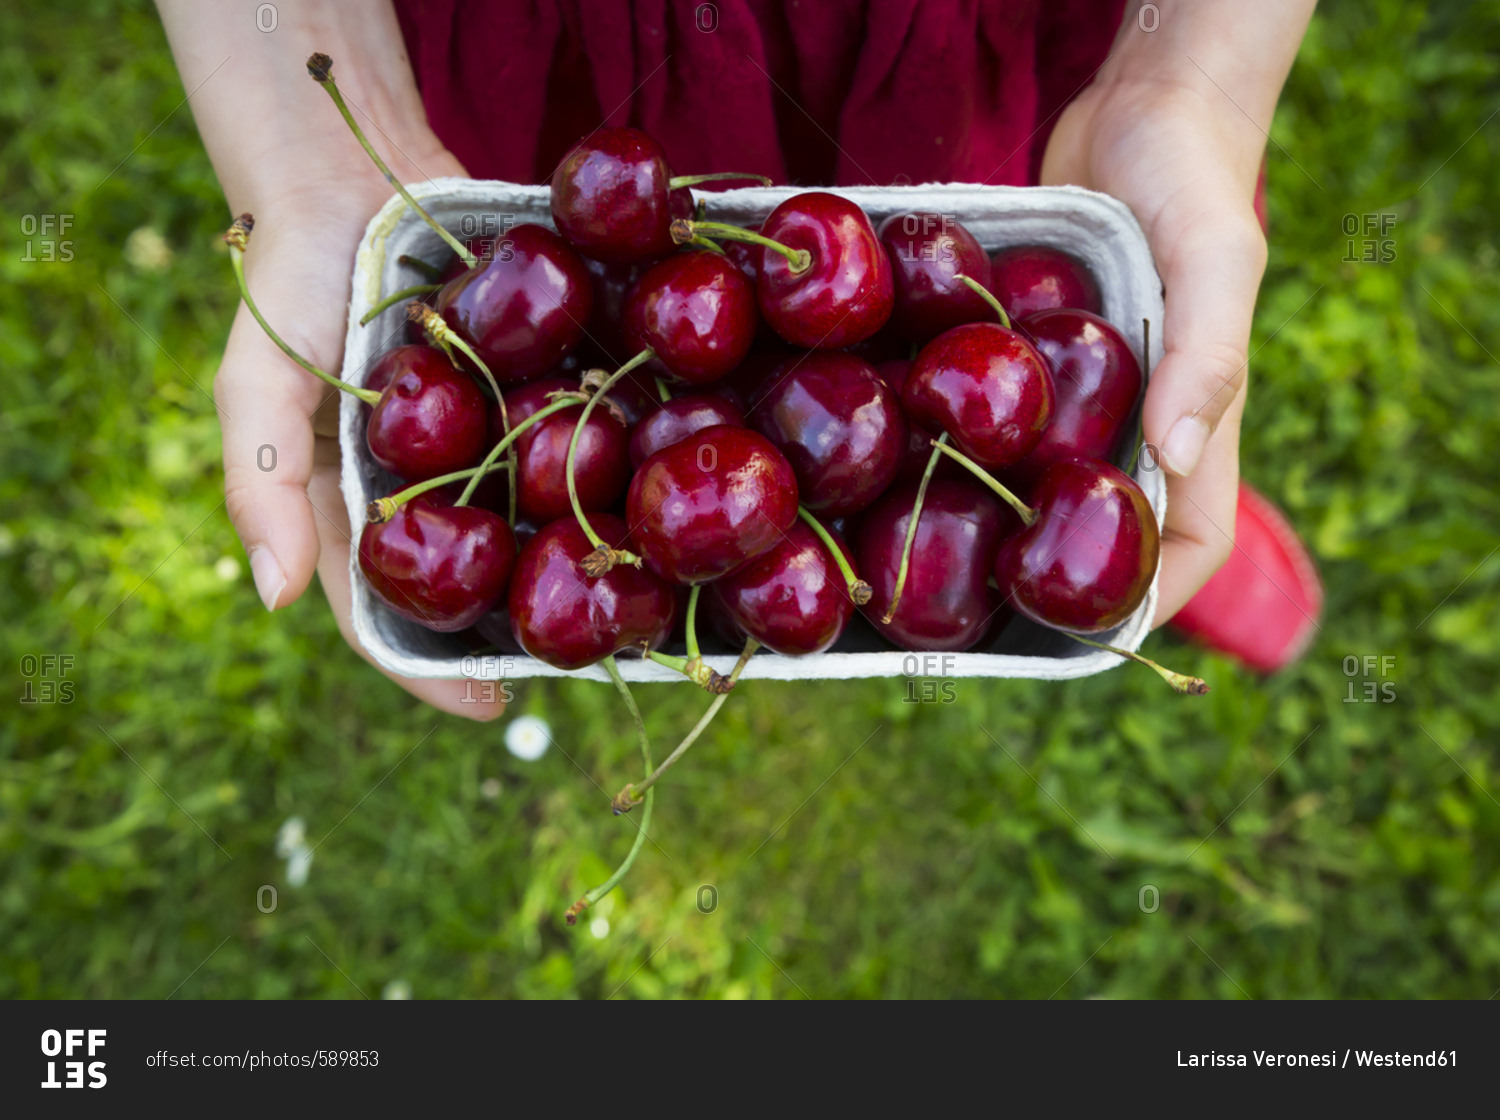 Girl's hands dress holding cardboard box of cherries- close-up